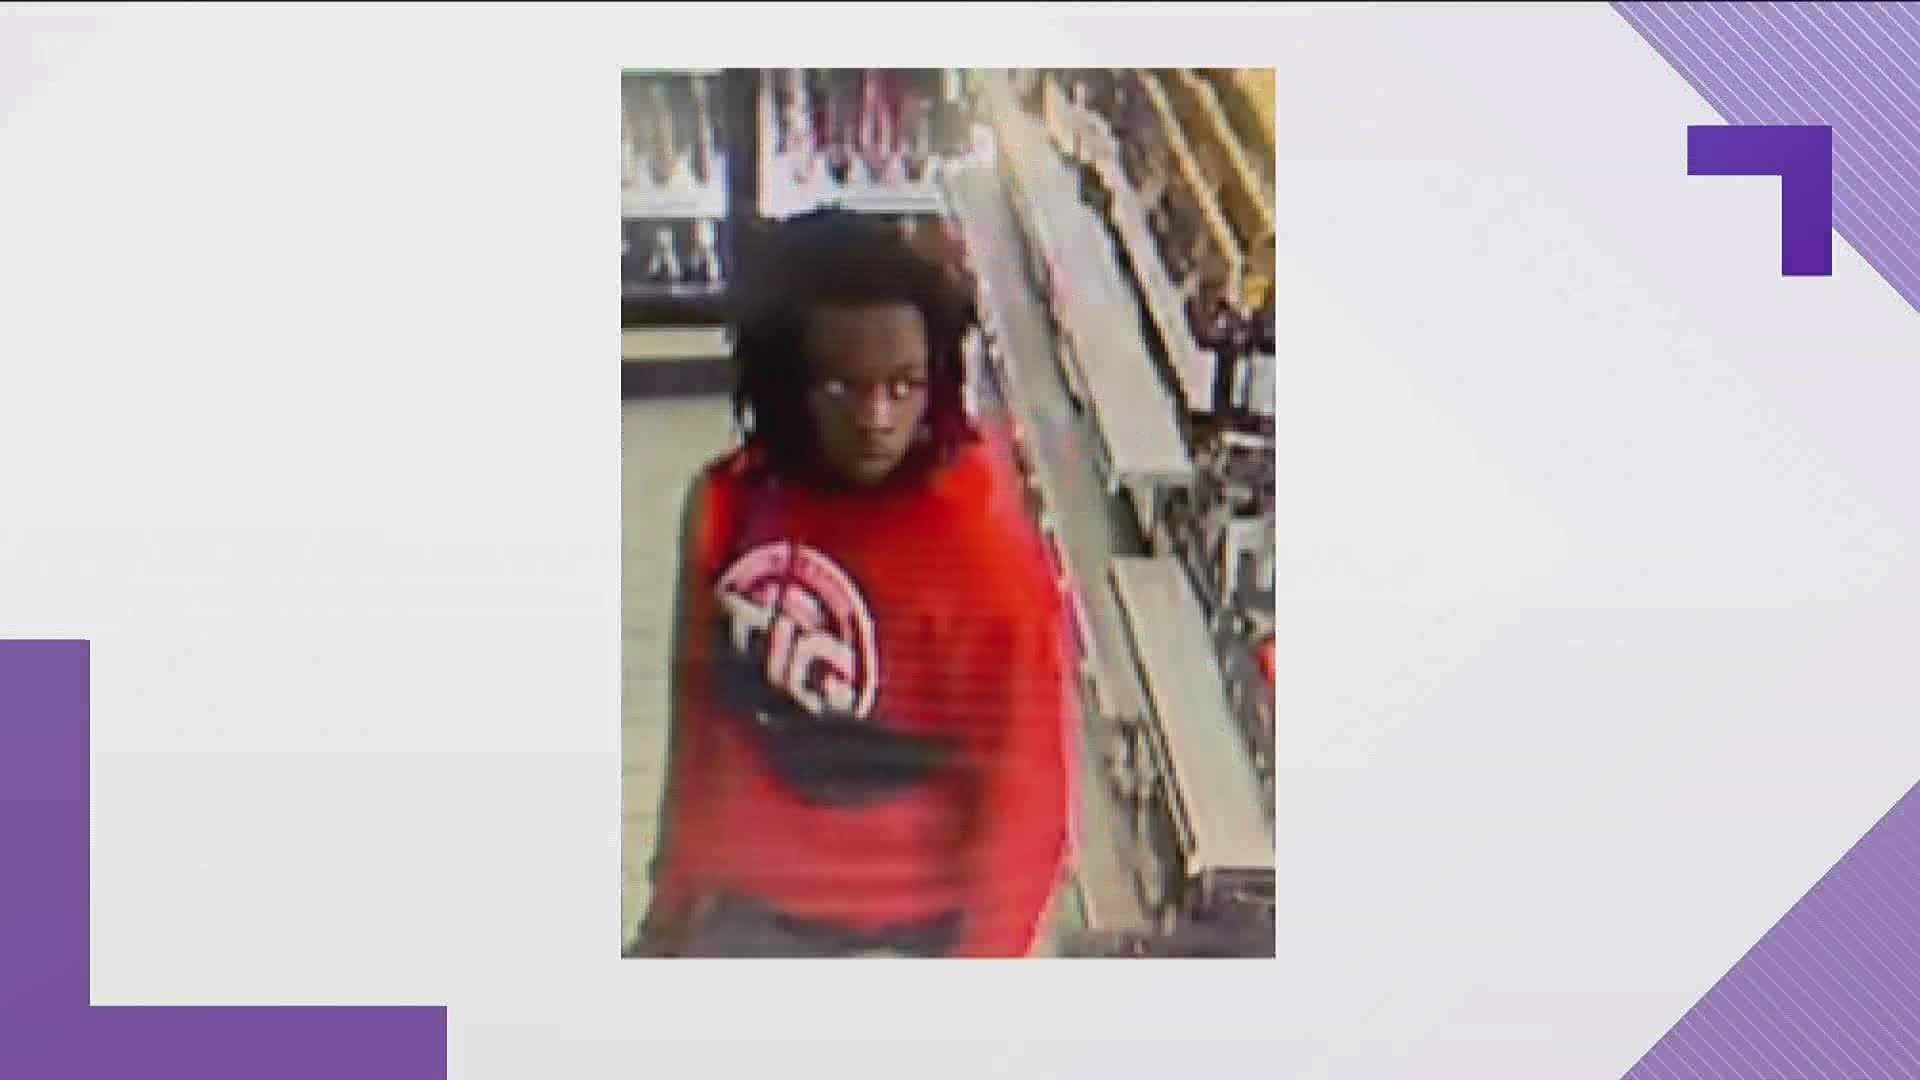 South Fulton police are asking for help from the public in identifying the person pictured and described.